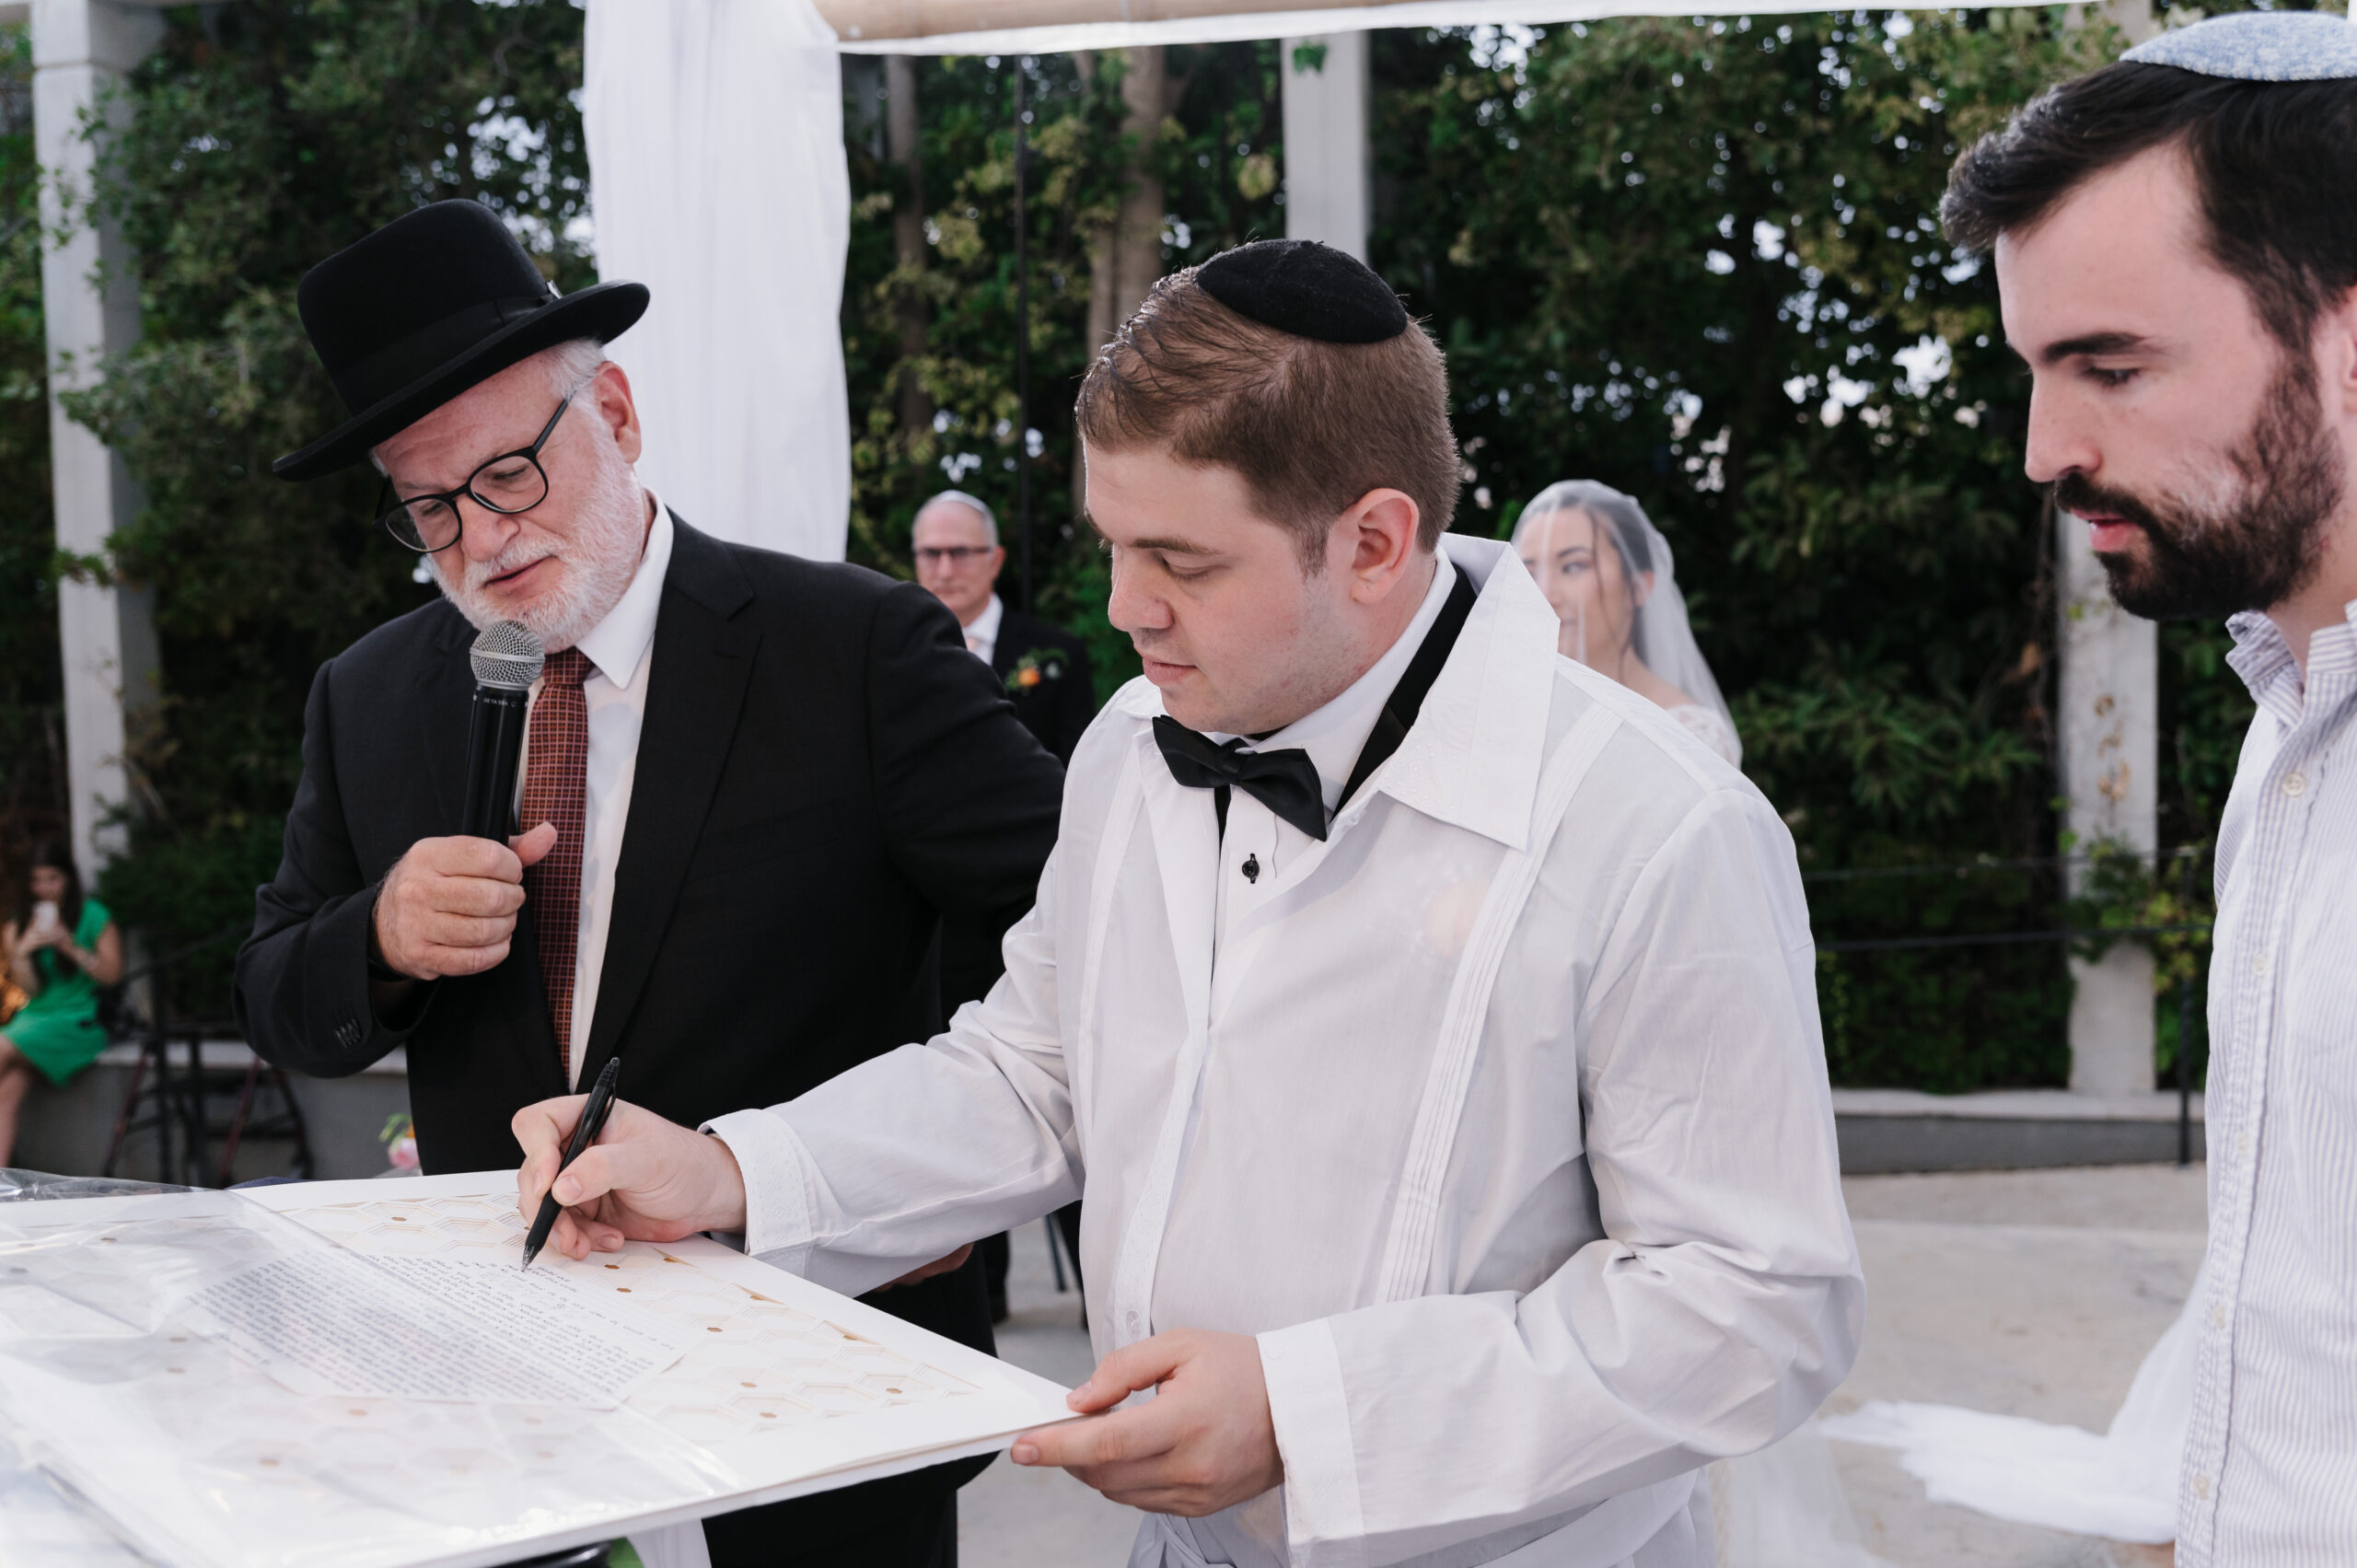 7. A checklist image for ensuring a Ketubah is legally sound